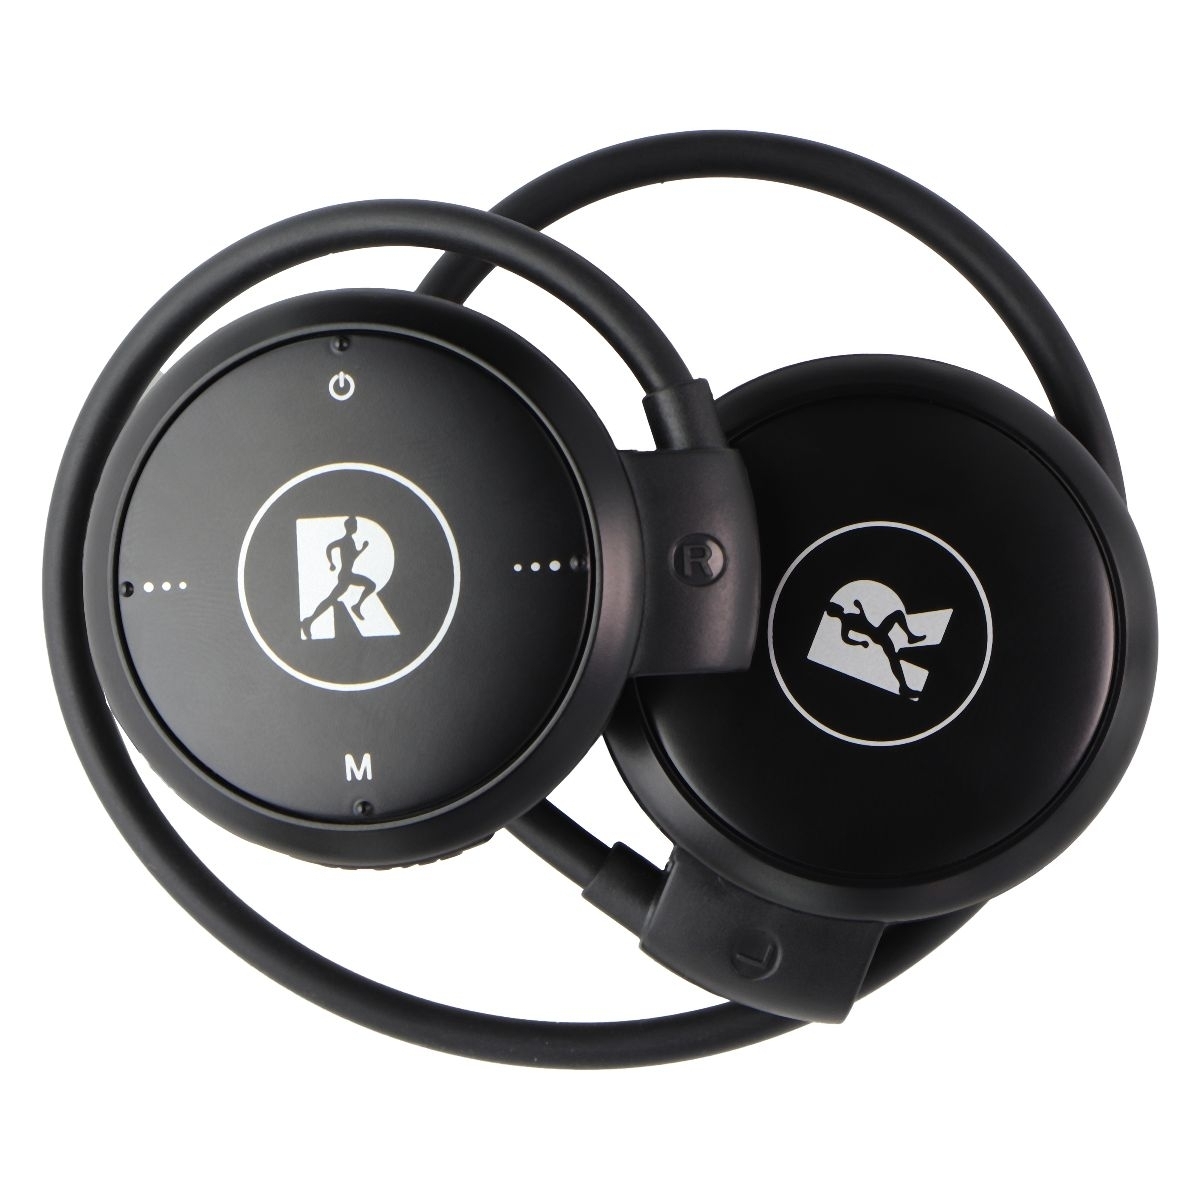 Runar (RNR1) Wireless Running Headphones For IOS And Android - Black (Refurbished)